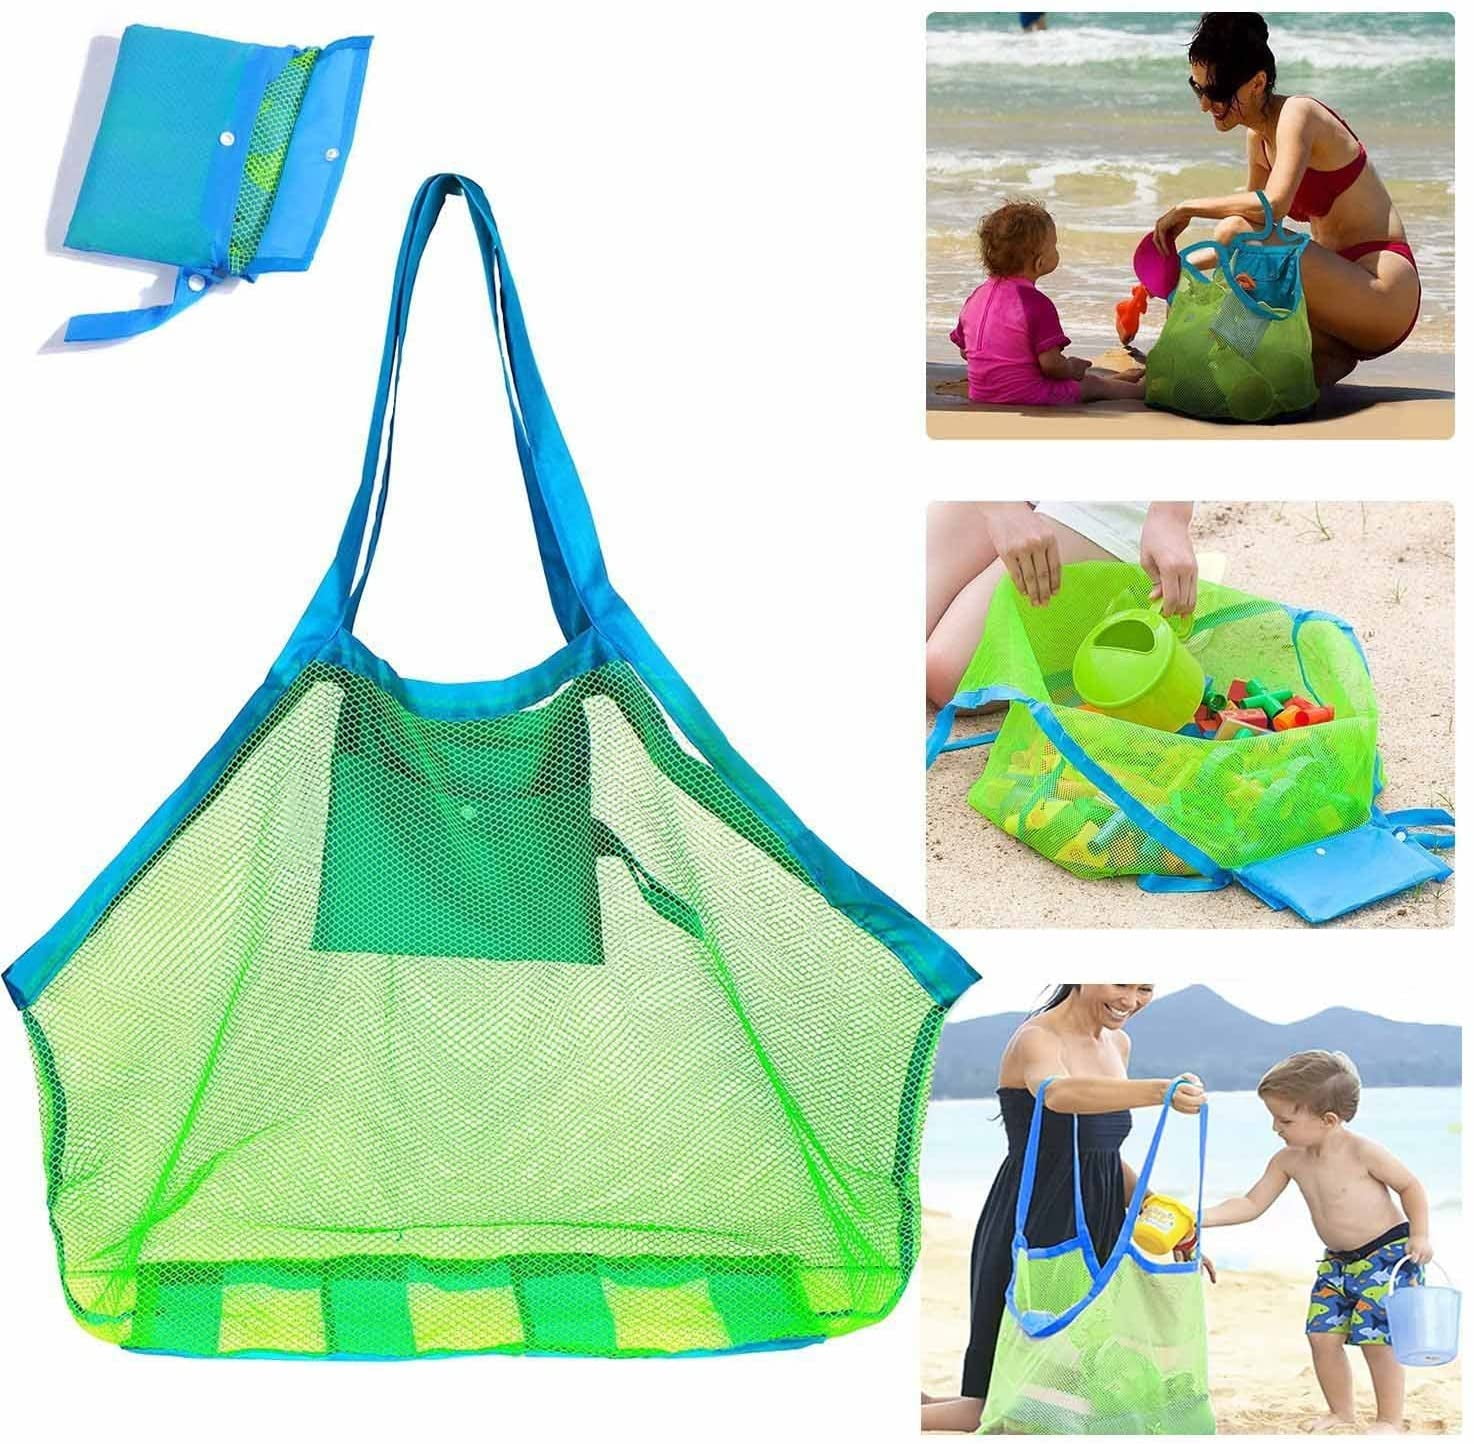 Mesh Beach Bag Tote Bag Lightweight Waterproof Totes Large Capacity Beach Toy Bag,with Insulated Cooler Bottom